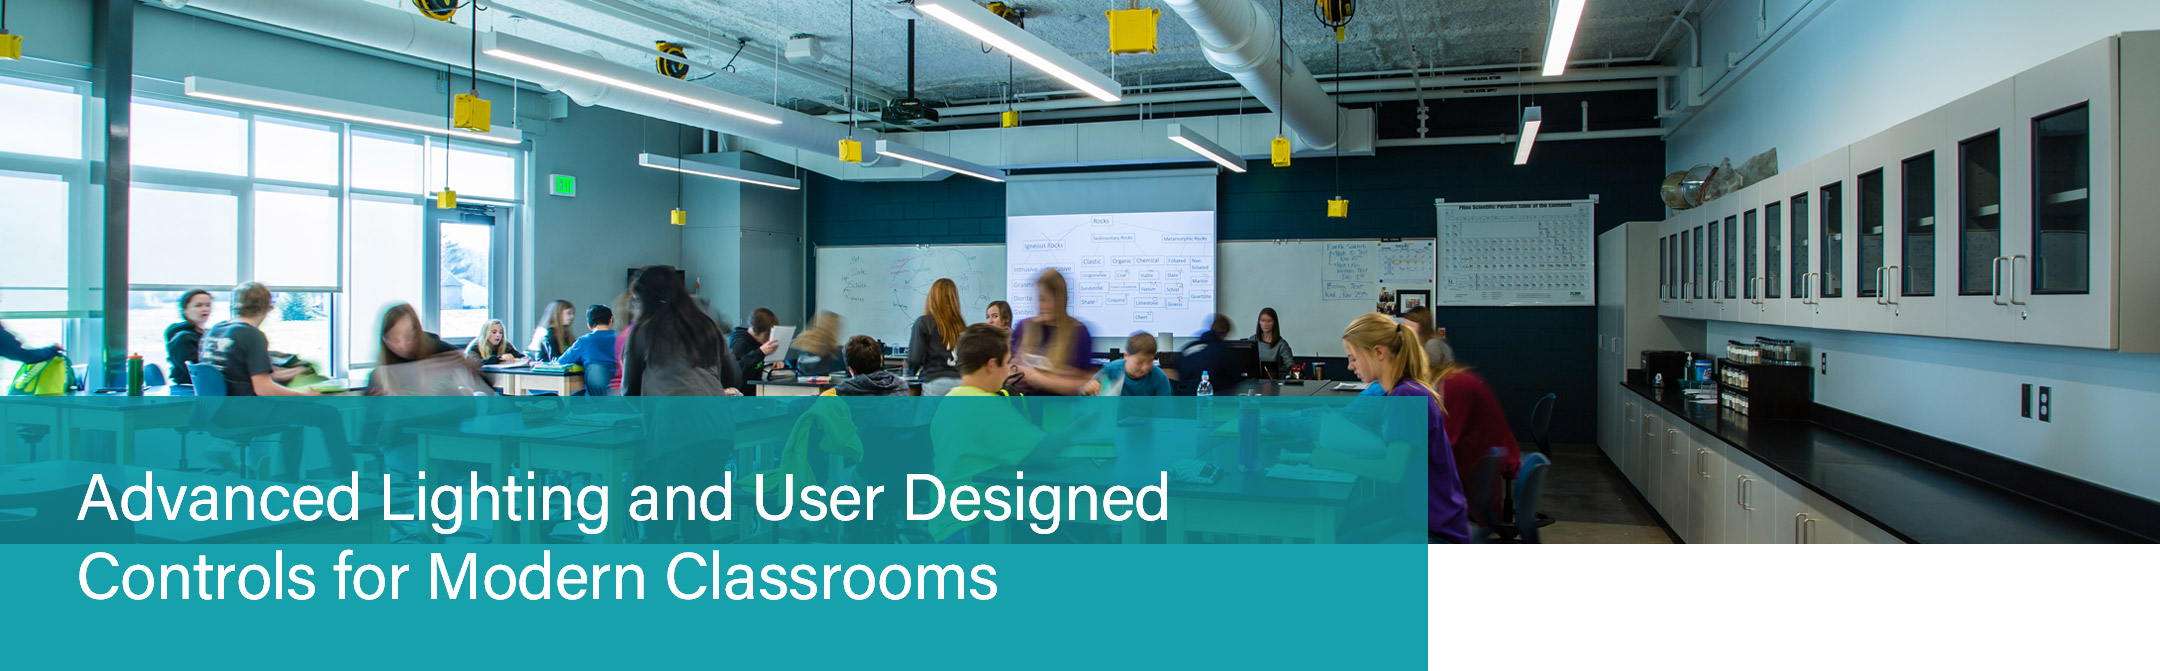 Advanced Lighting and User Designed Controls for Modern Classrooms